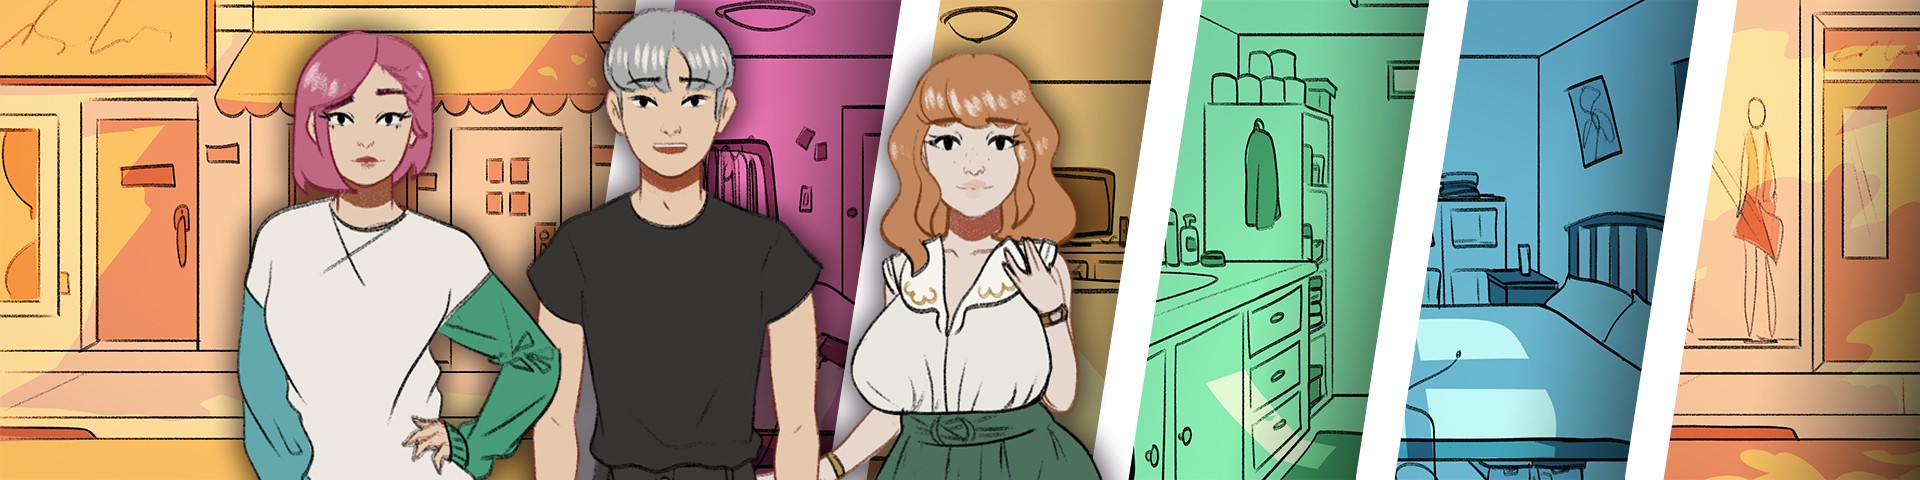 Sugar Service Apk Android Adult Game Download (1)